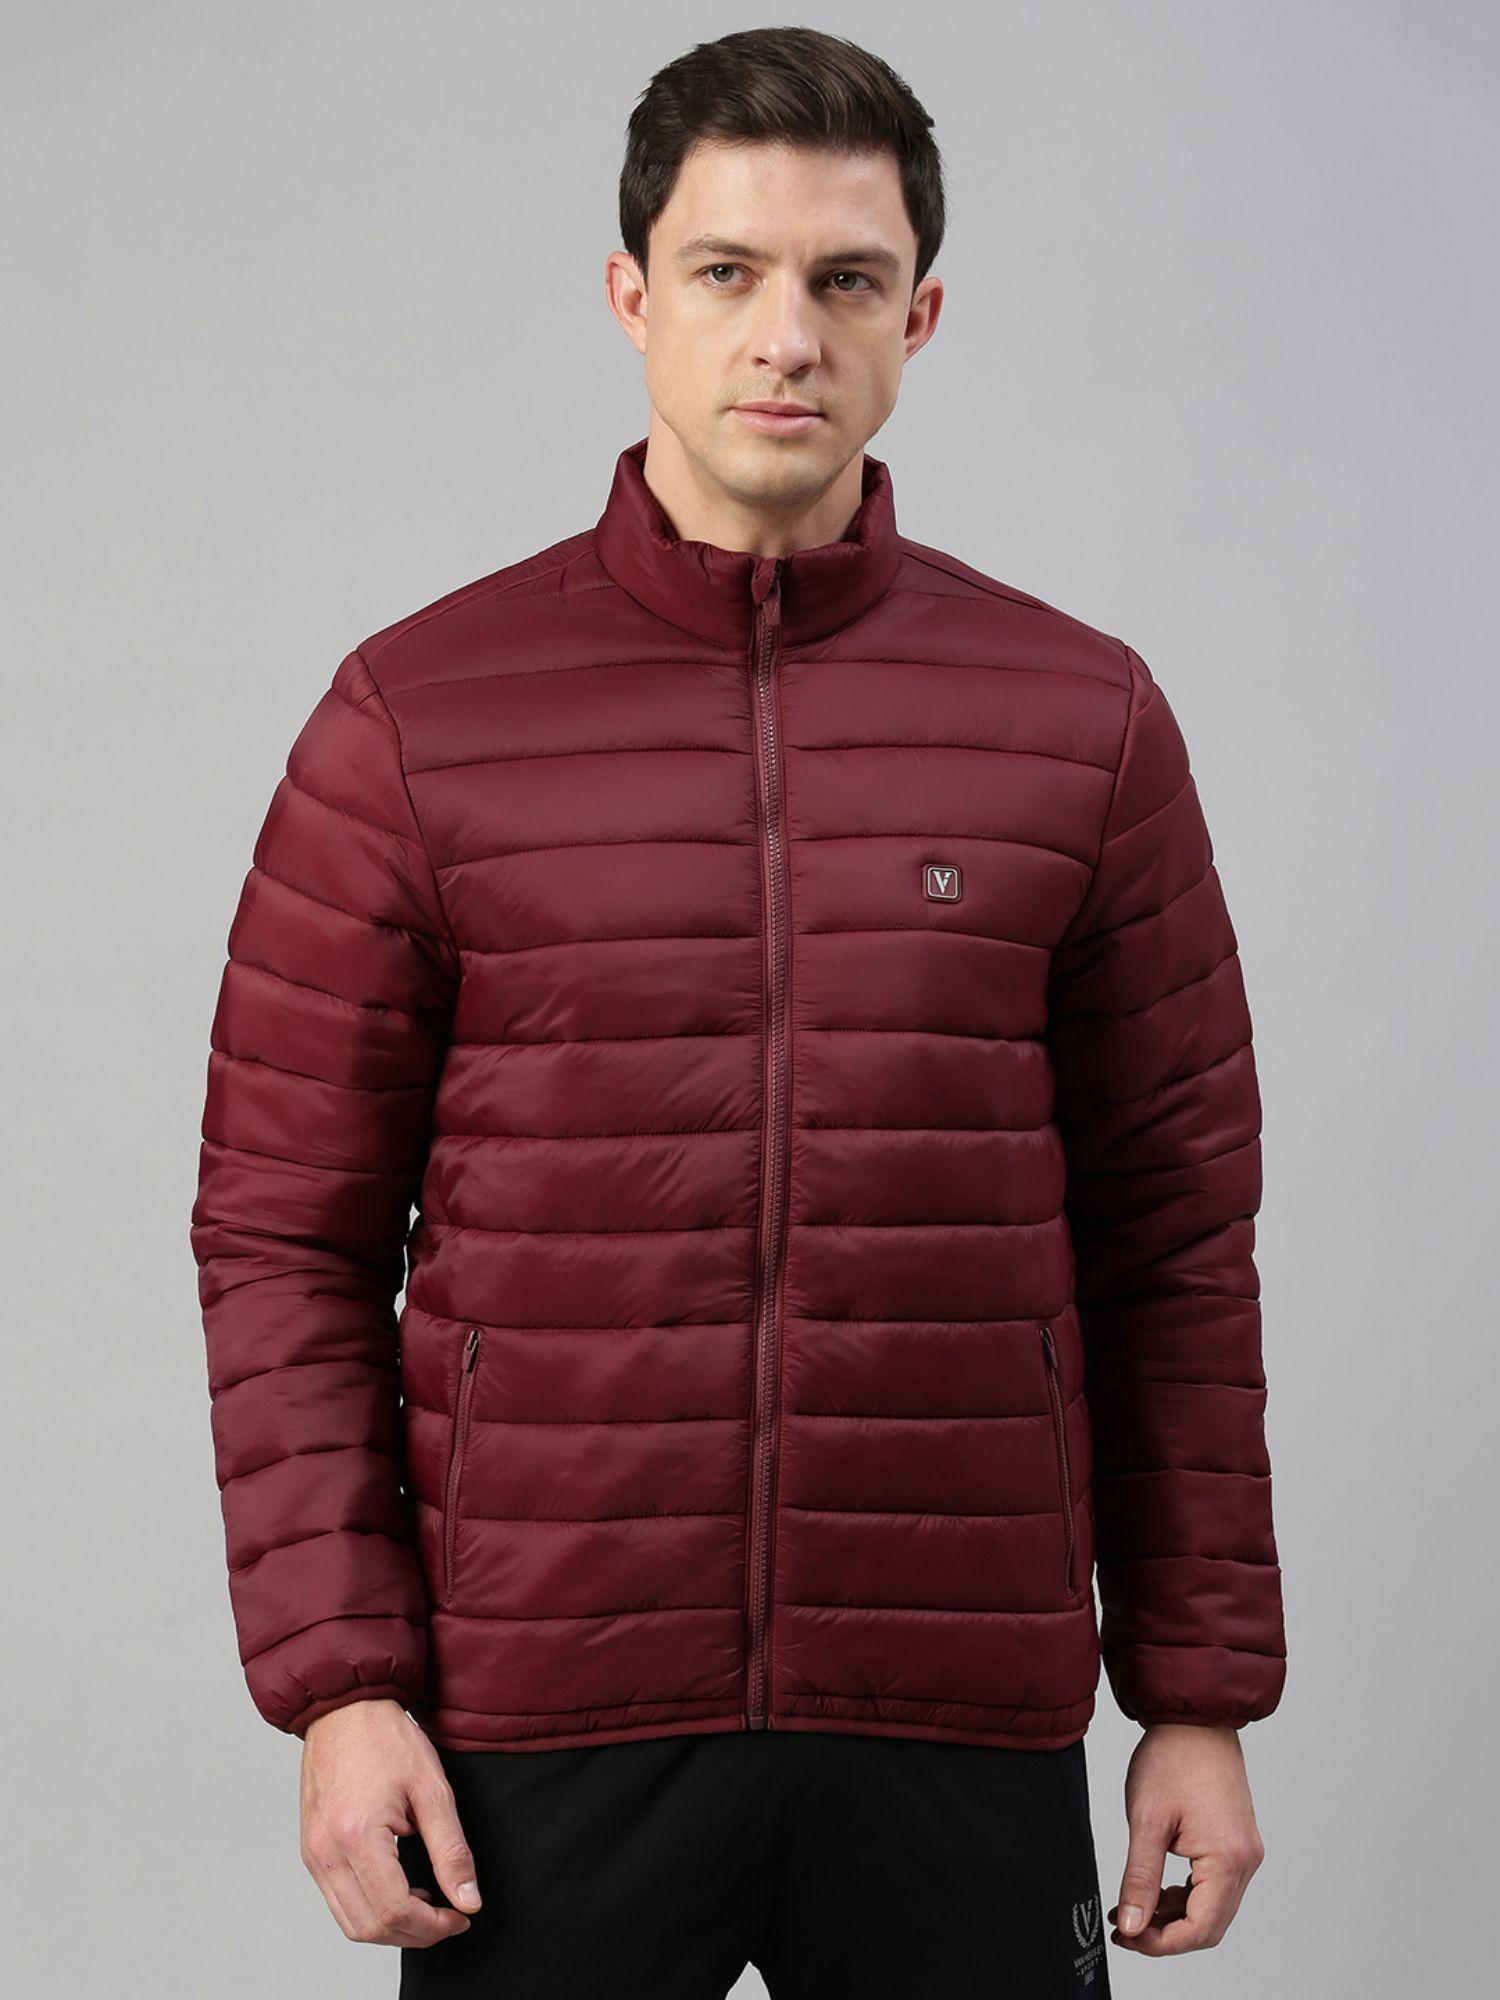 athleisure-extra-warm-and-high-neck-woven-jacket---maroon